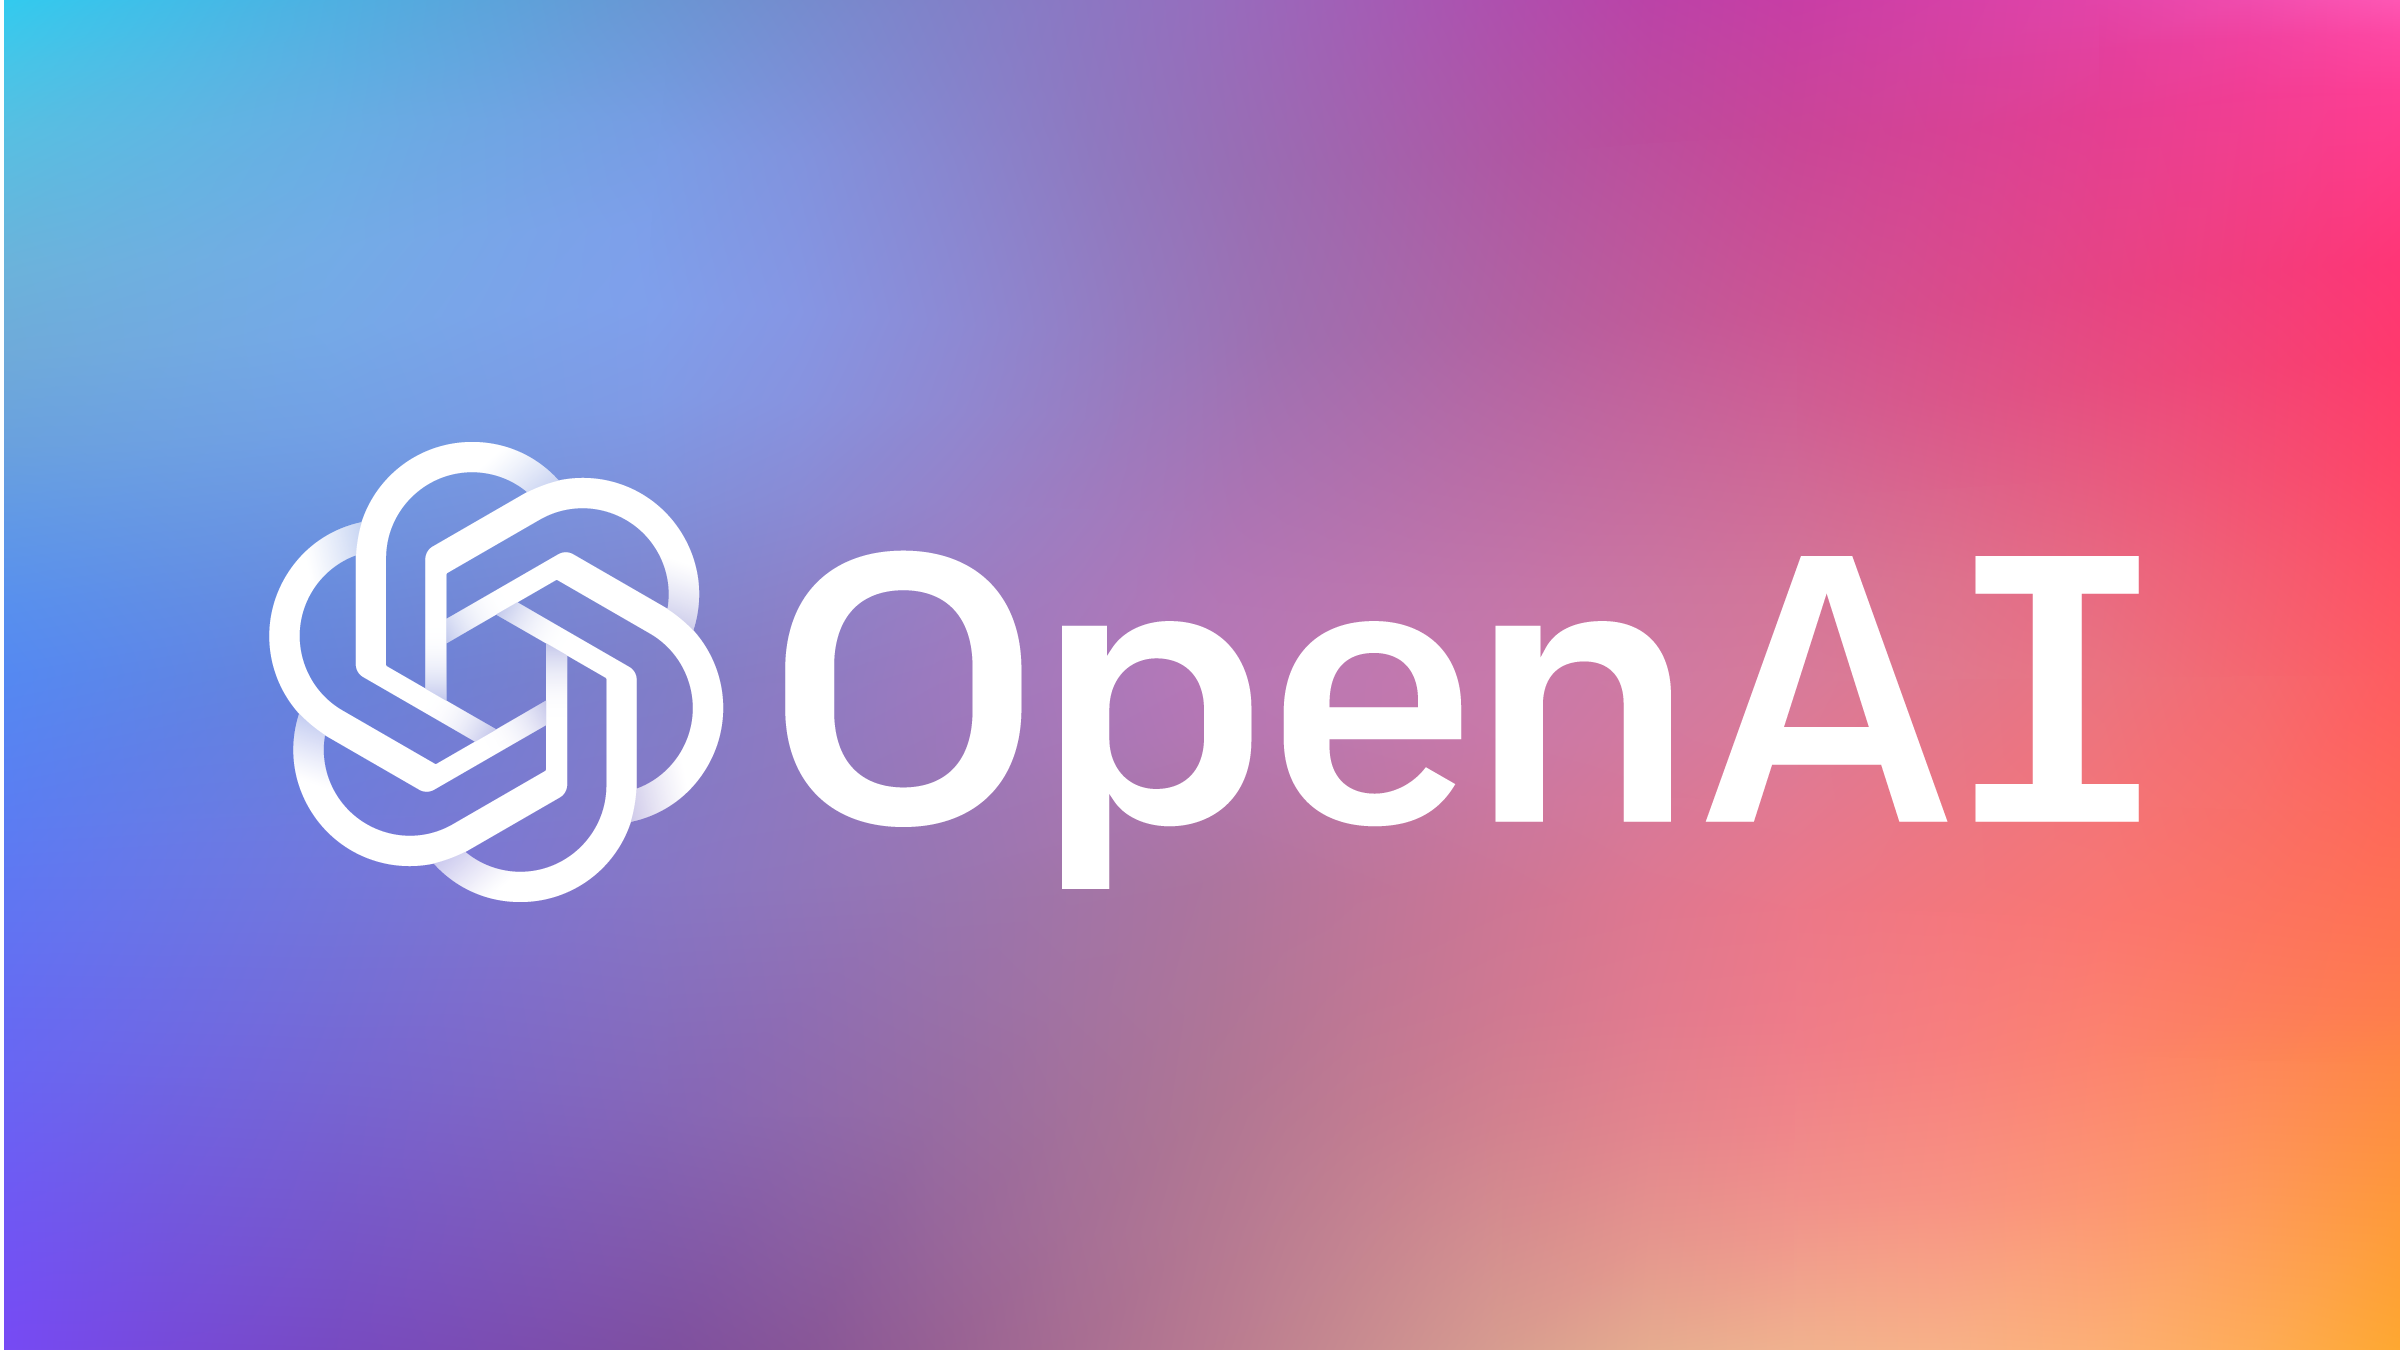 Openai Client For Android With Chatgpt Support Hot Sex Picture